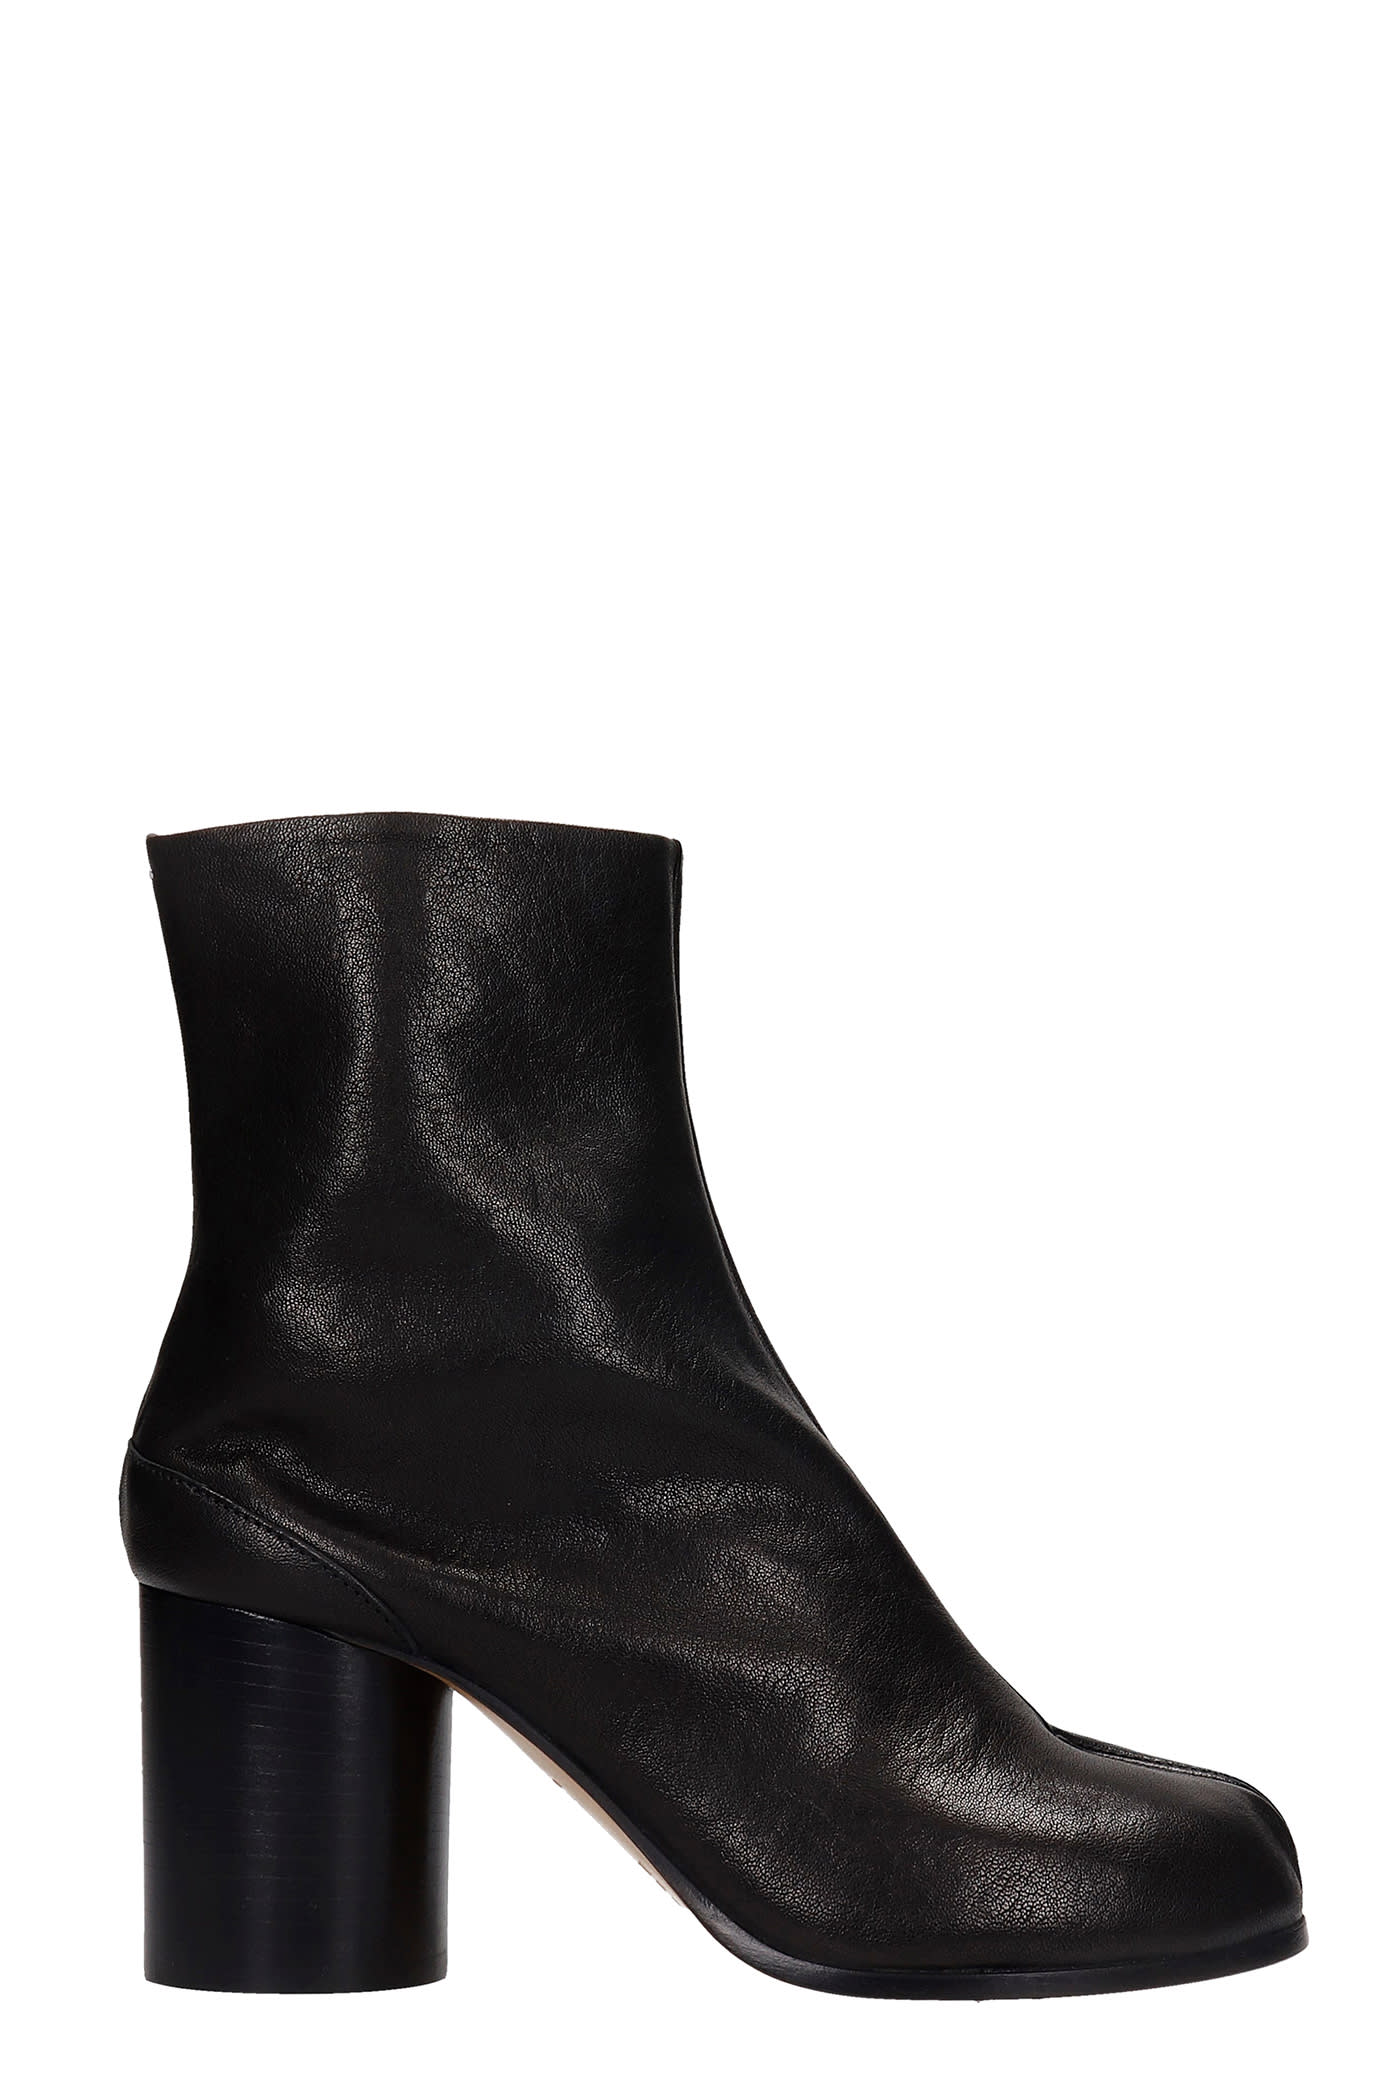 Maison Margiela Tabi High Heels Ankle Boots In Black Leather